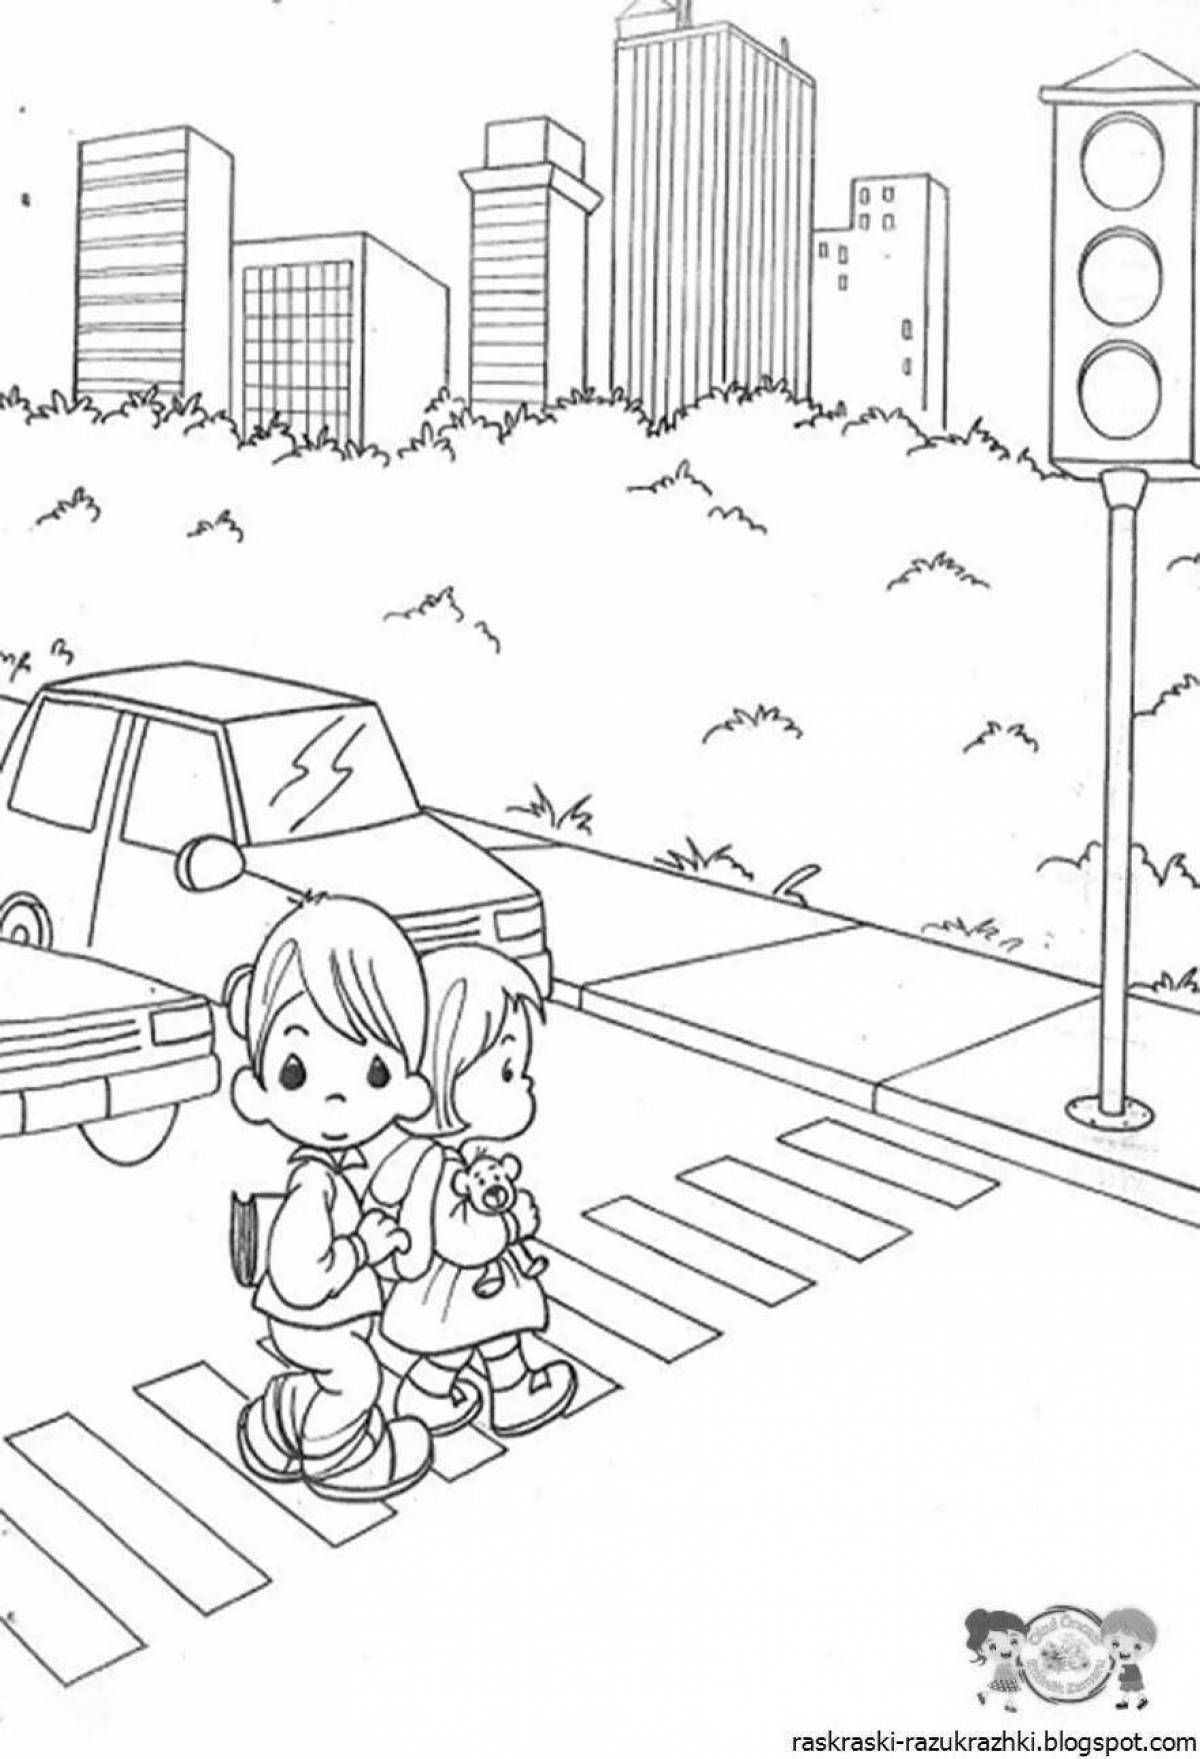 Exquisite crossroad coloring page